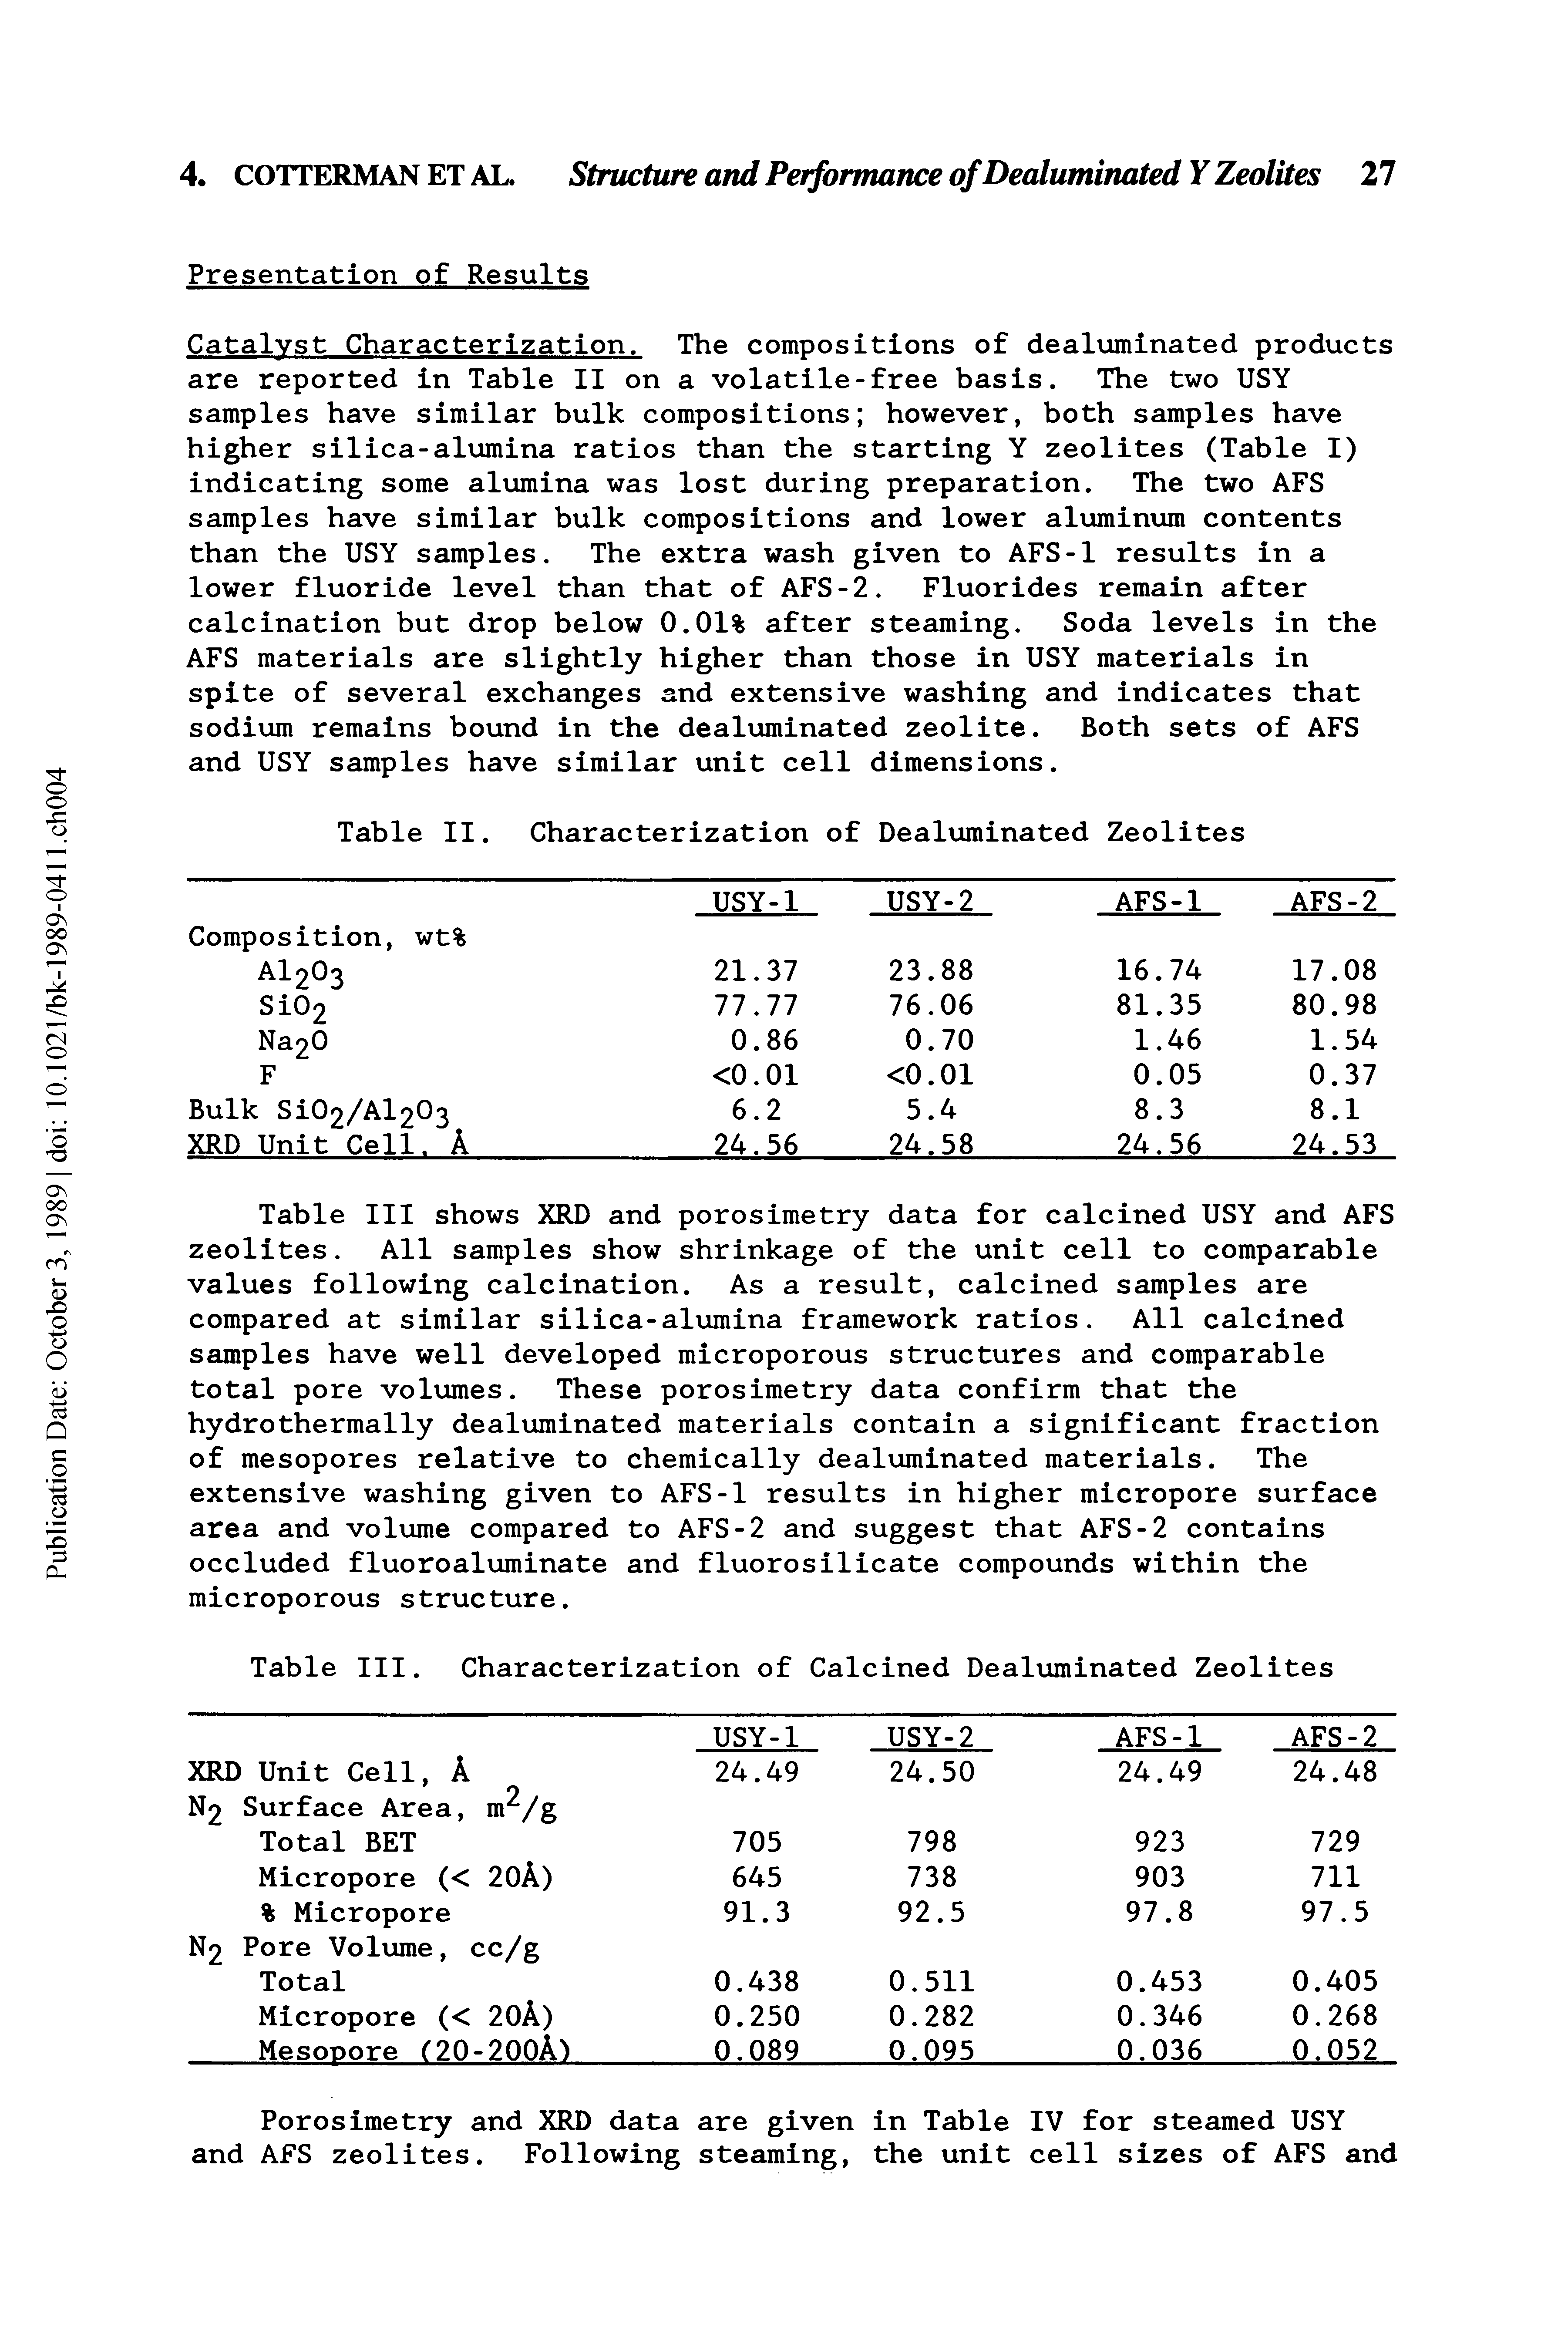 Table III shows XRD and porosimetry data for calcined USY and AFS zeolites. All samples show shrinkage of the unit cell to comparable values following calcination. As a result, calcined samples are compared at similar silica-alumina framework ratios. All calcined samples have well developed microporous structures and comparable total pore volumes. These porosimetry data confirm that the hydrothermally dealuminated materials contain a significant fraction of mesopores relative to chemically dealuminated materials. The extensive washing given to AFS-1 results in higher micropore surface area and volume compared to AFS-2 and suggest that AFS-2 contains occluded fluoroaluminate and fluorosilicate compounds within the microporous structure.